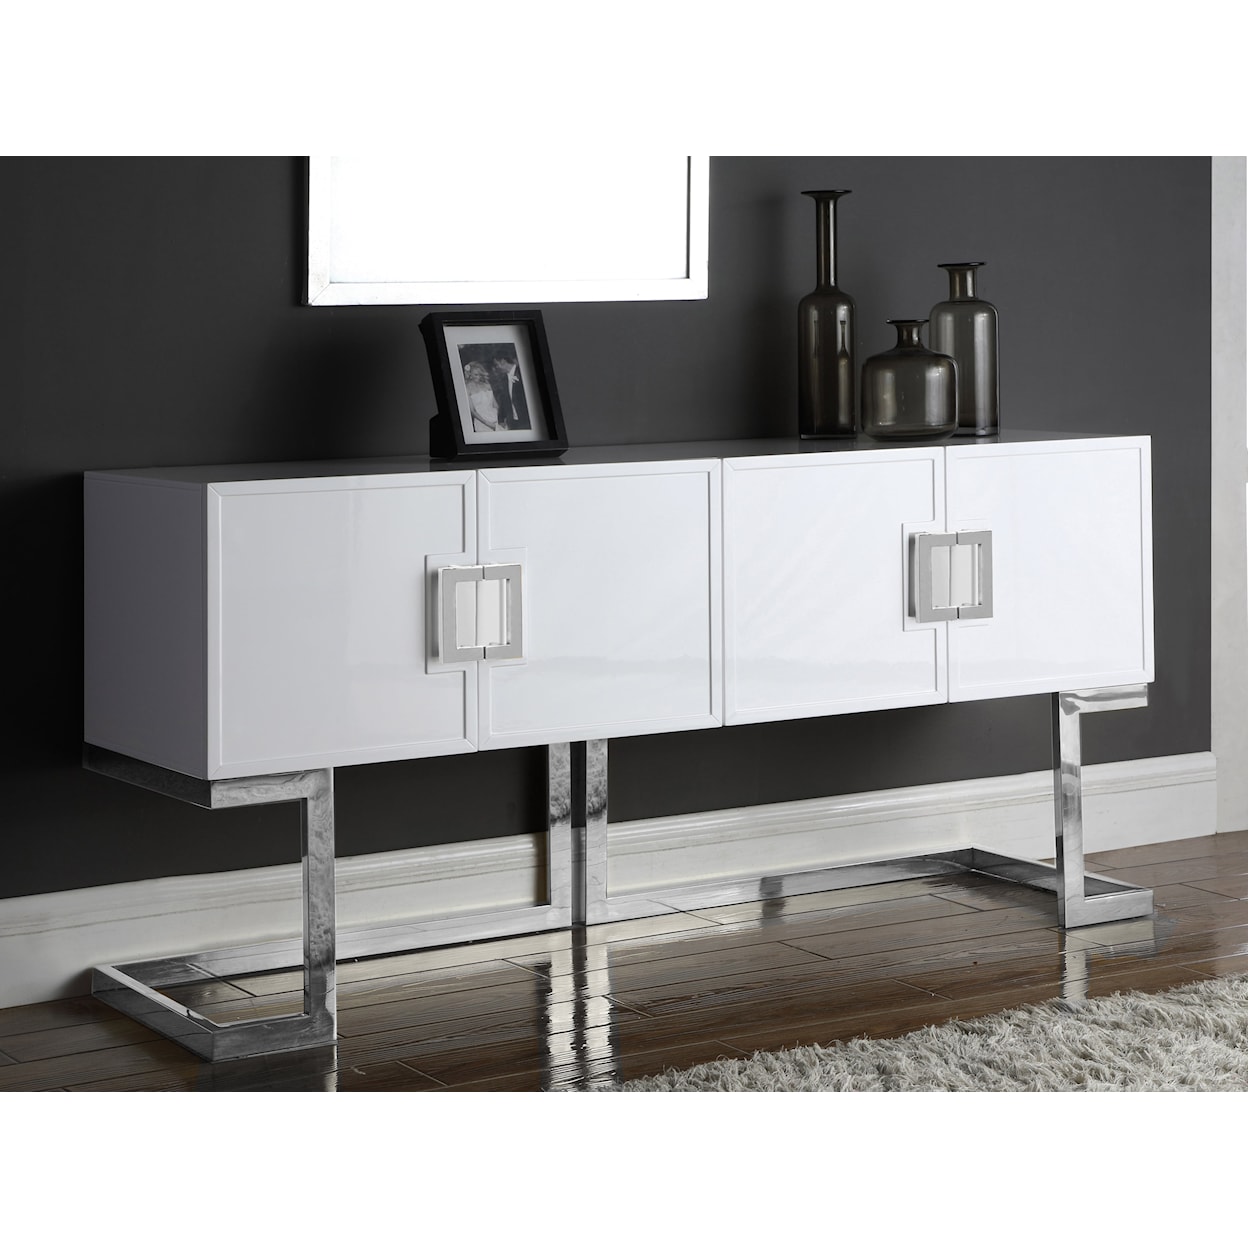 Meridian Furniture Beth Sideboard with Chrome Stainless Steel Base